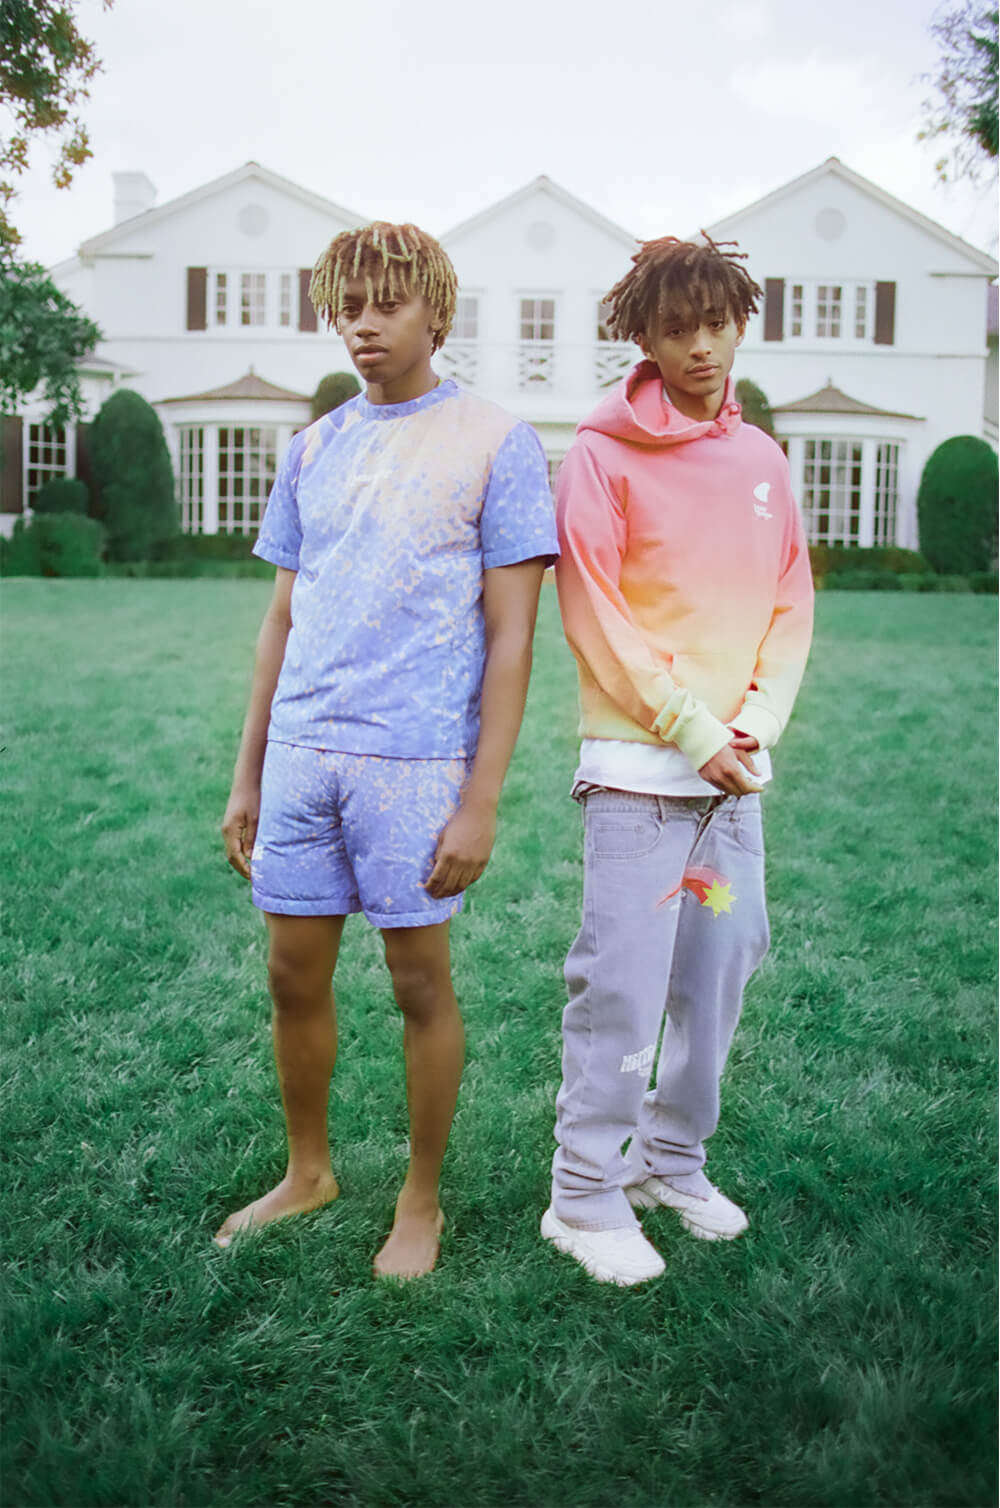 Jaden Smith on MSFTSrep & Sustainability for the 'Future of